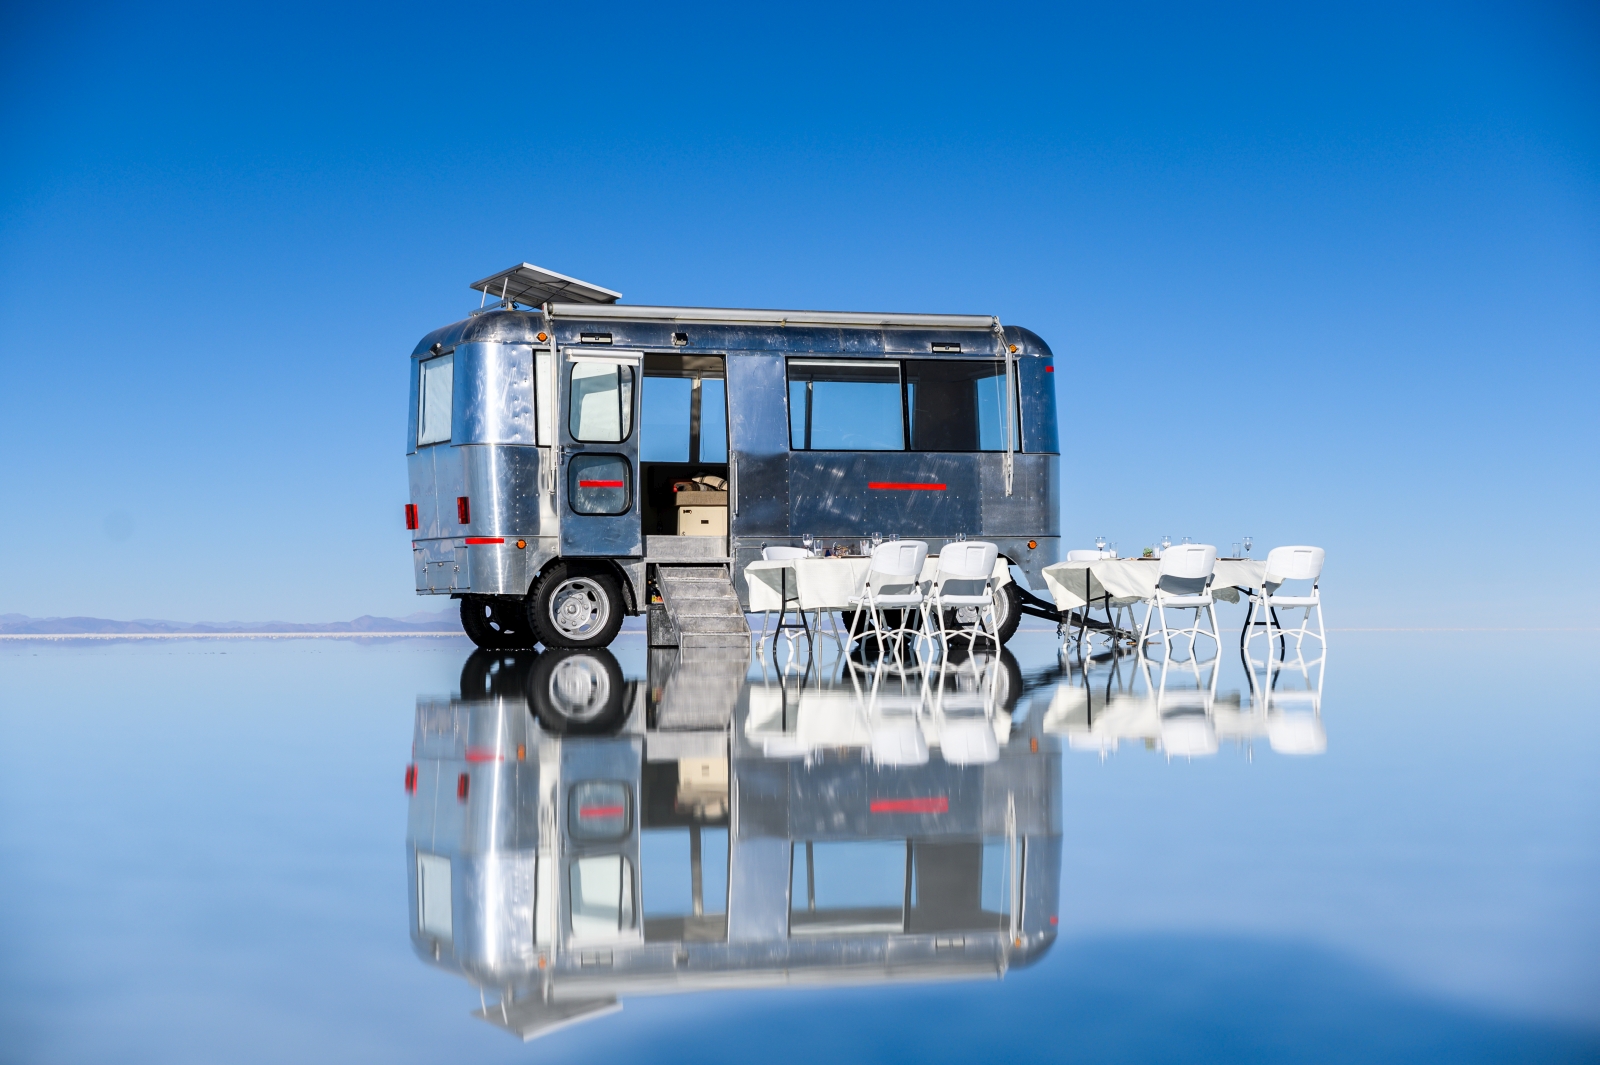 Morning view of Deluxe Airstream Camper in Bolivia Salt Flats